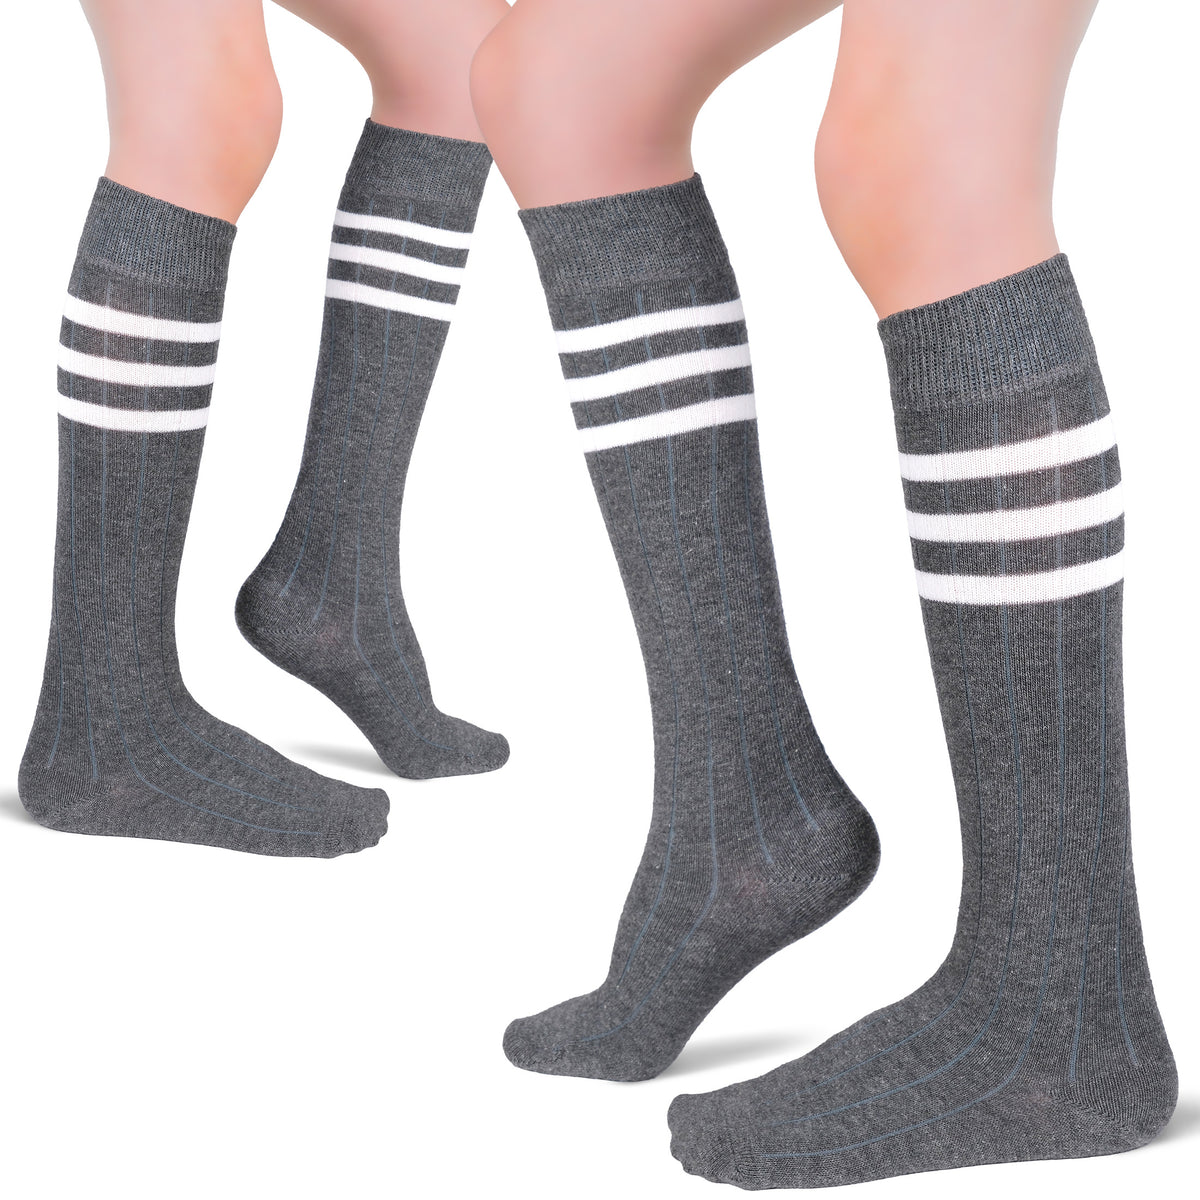 Two ladies are seen wearing Cotton Kids' Knee-High Socks in gray with white stripes in this image.